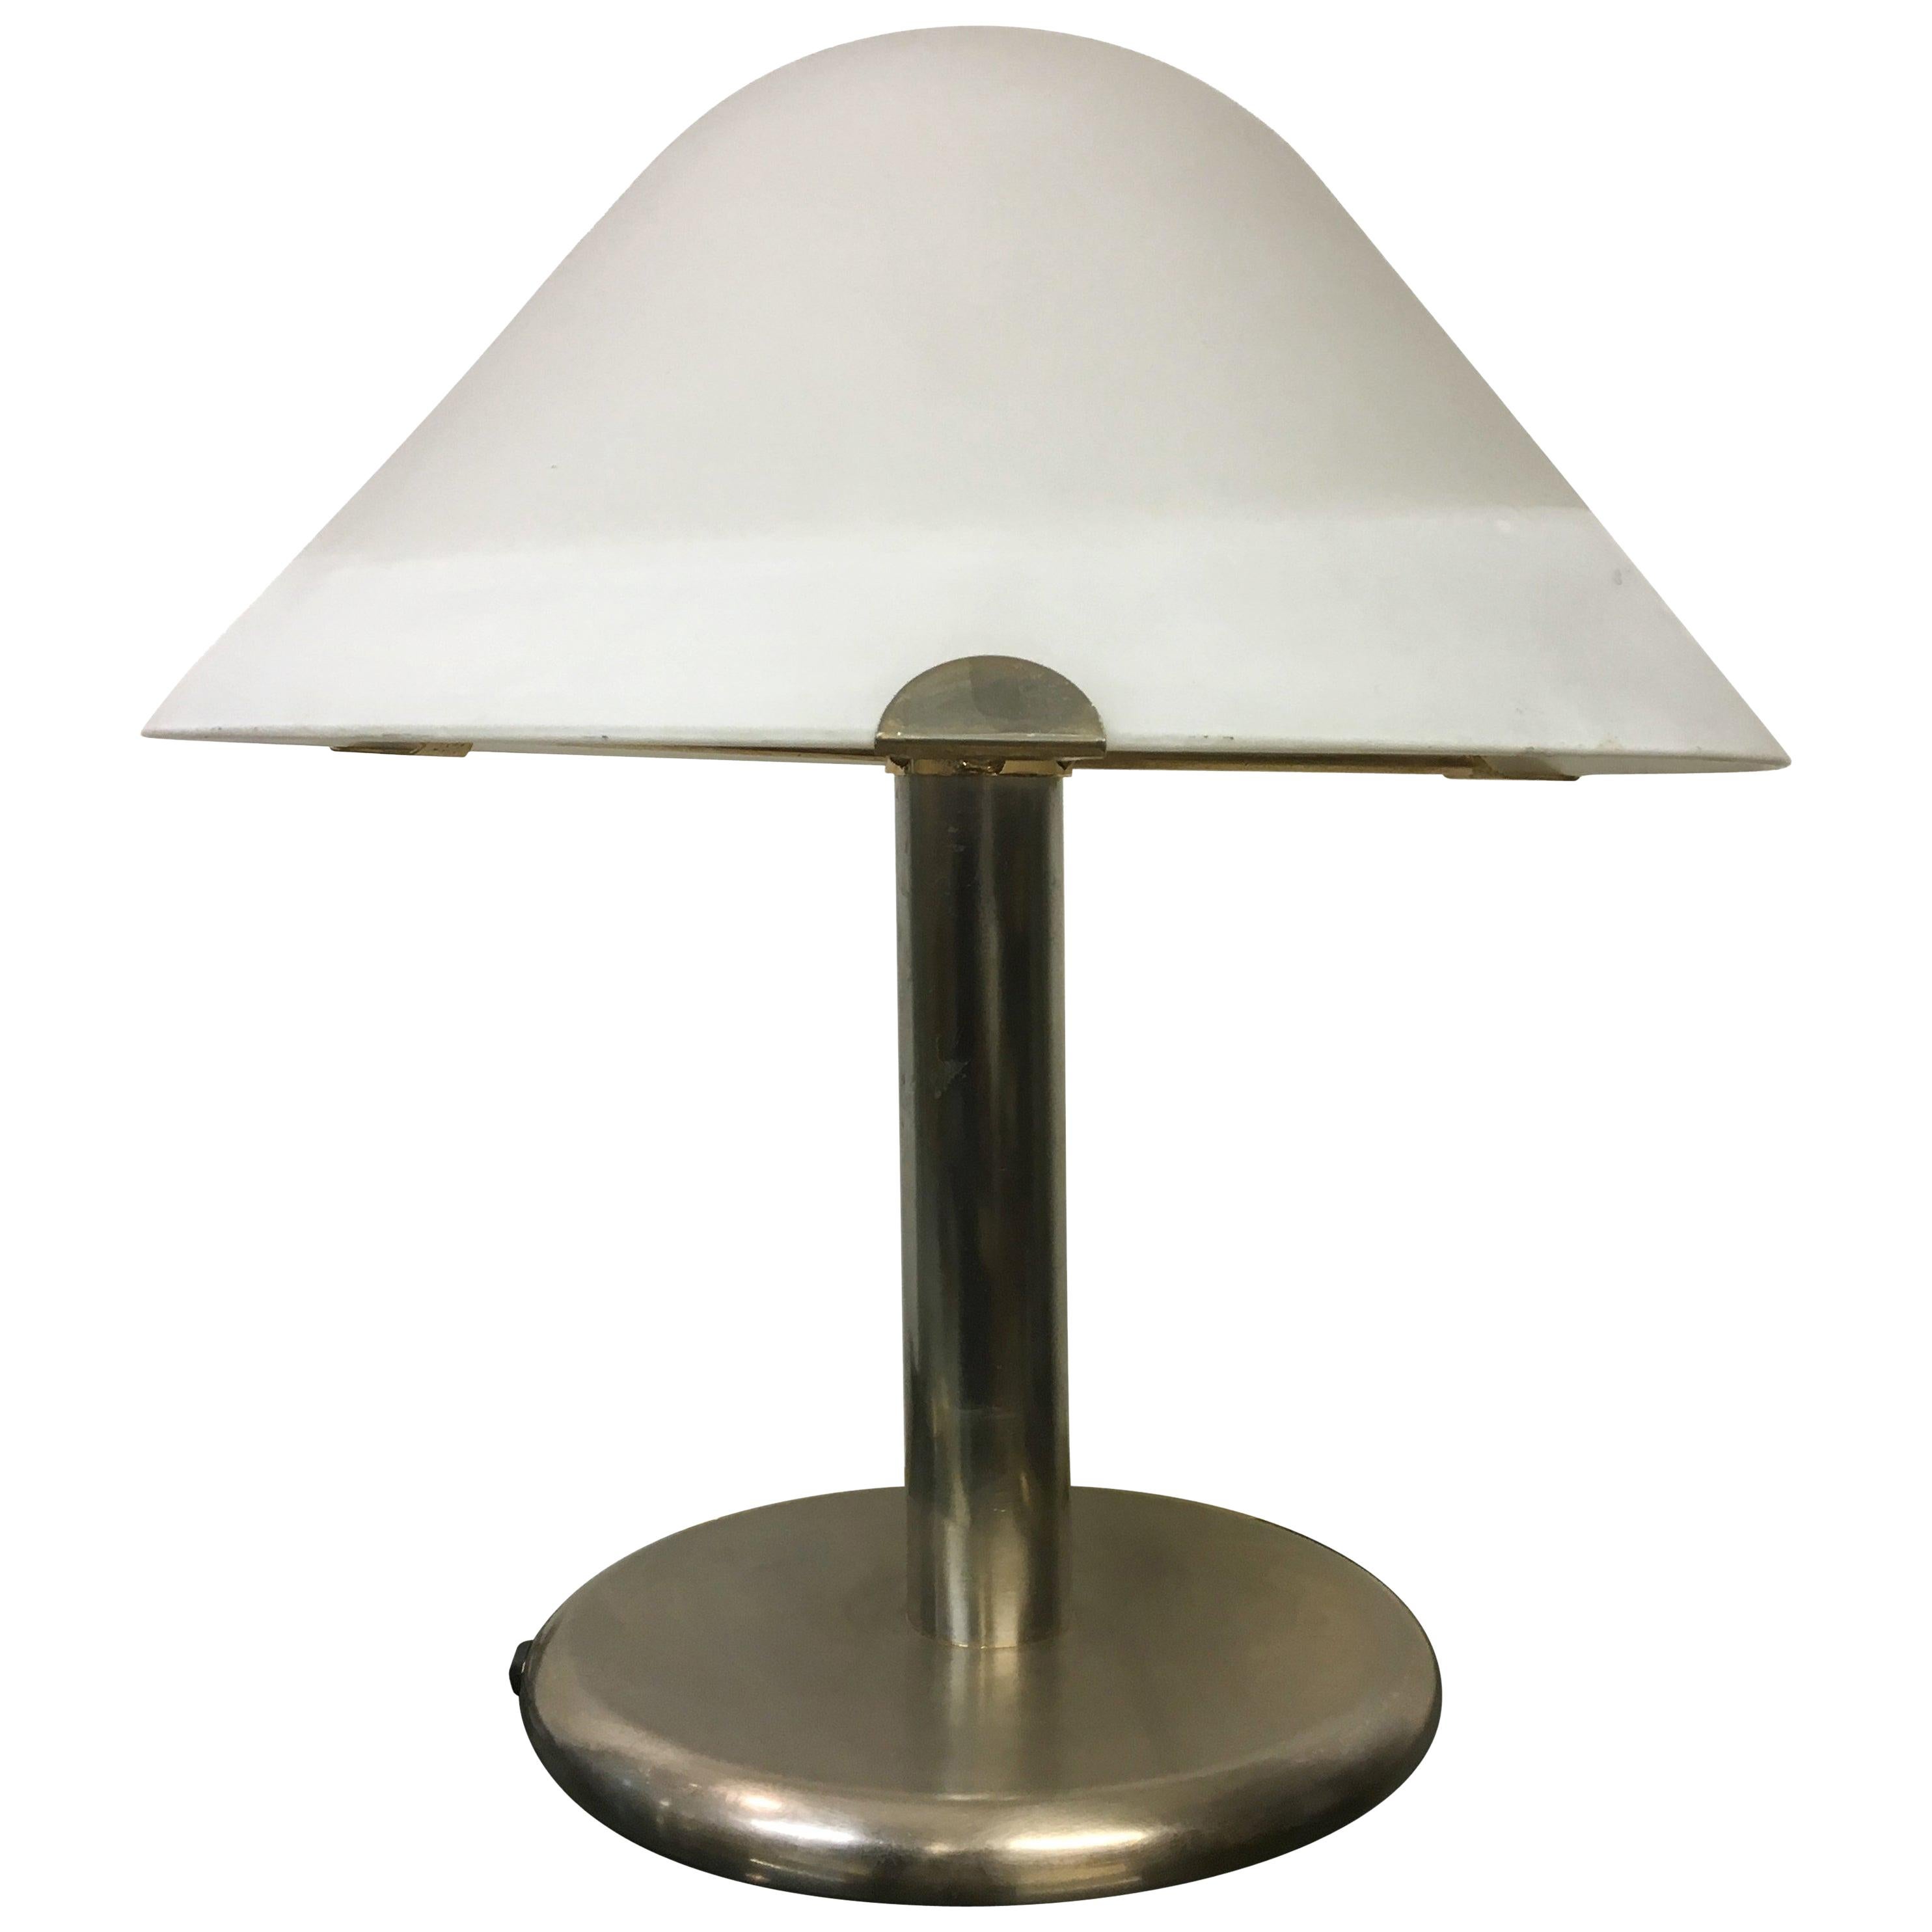 Murano Glass Large Ve Art Table Lamp from the 1970s